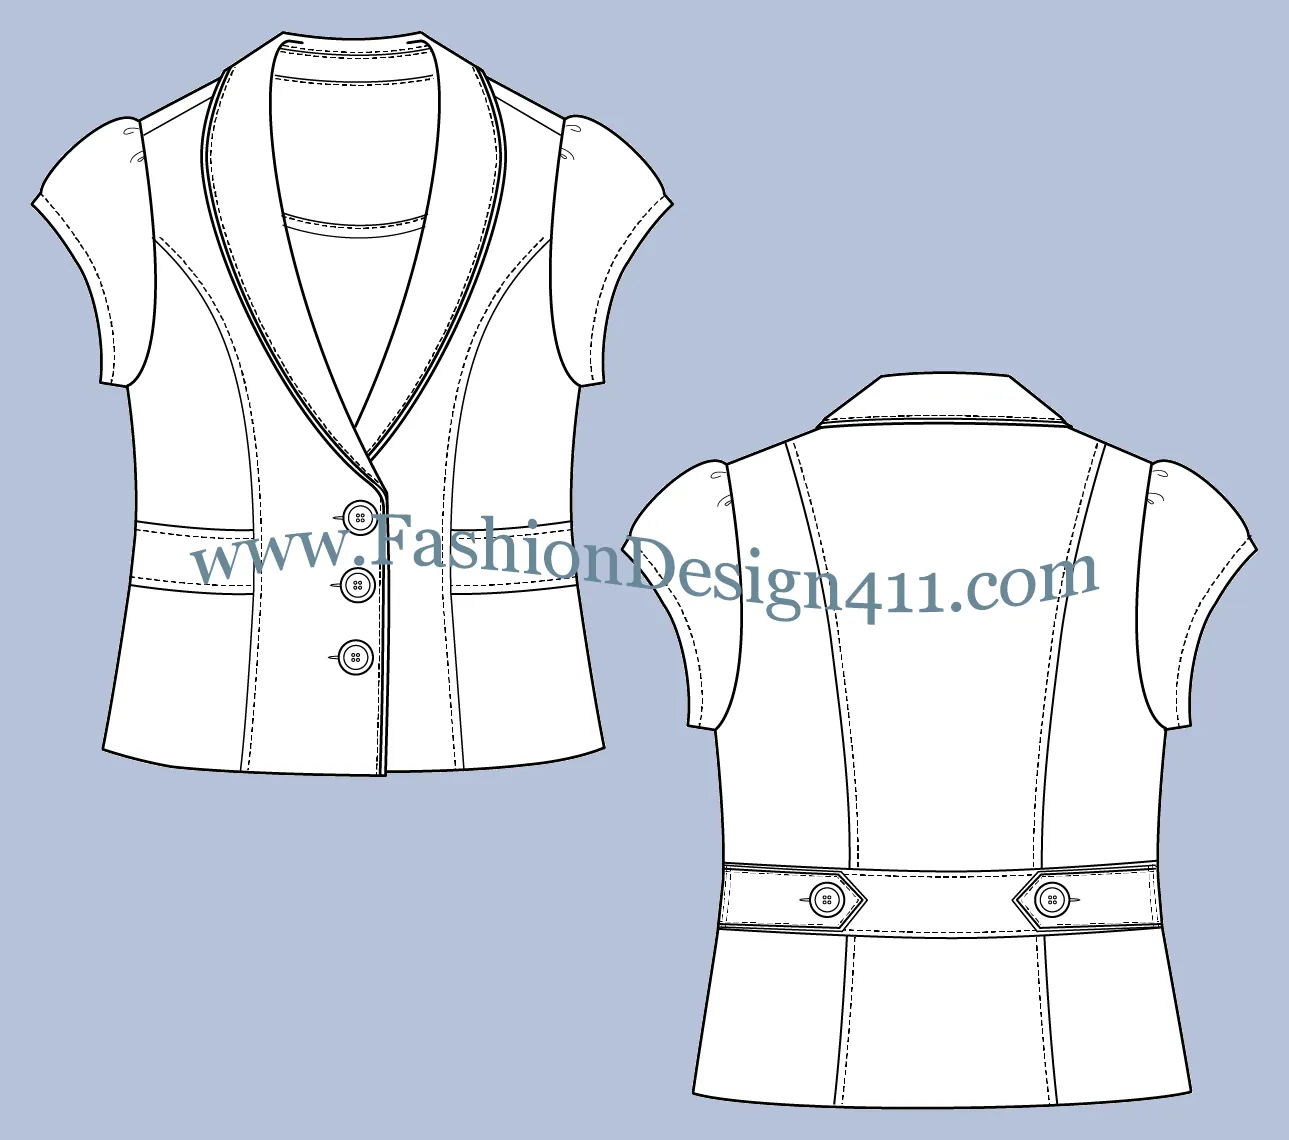 046 fashion flat sketch of a women's, shawl collar with piping, cropped, 3-button blazer wit puff cap sleeves